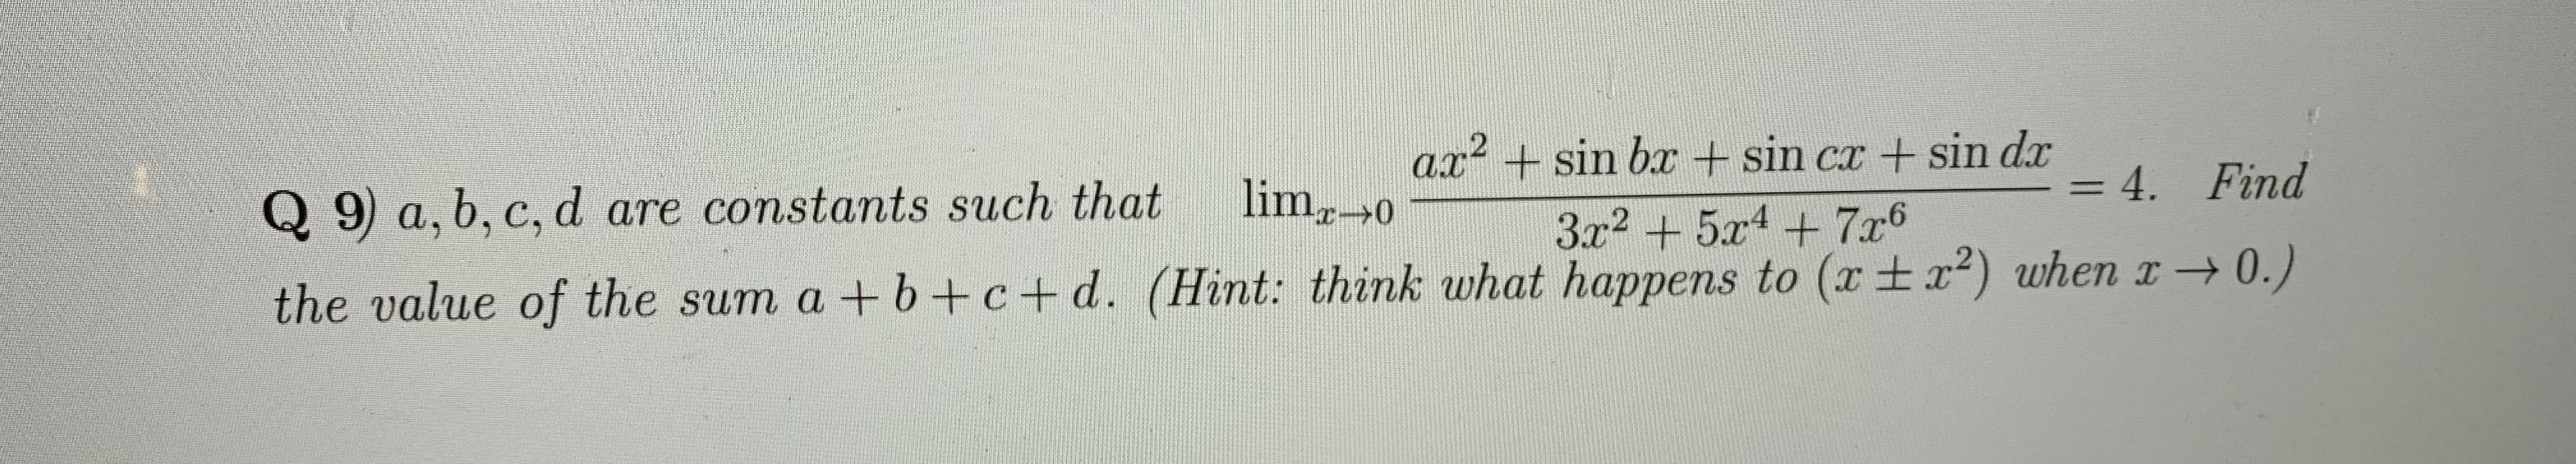 .2
ax + sin b + sin cx + sin dx
= 4. Find
Q 9) a, b, c, d are constants such that
lim0
%3D
3x2 + 5x1+ 7x6
the value of the sum a +b+c+d. (Hint: think what happens to (xtx?) when 0.)
